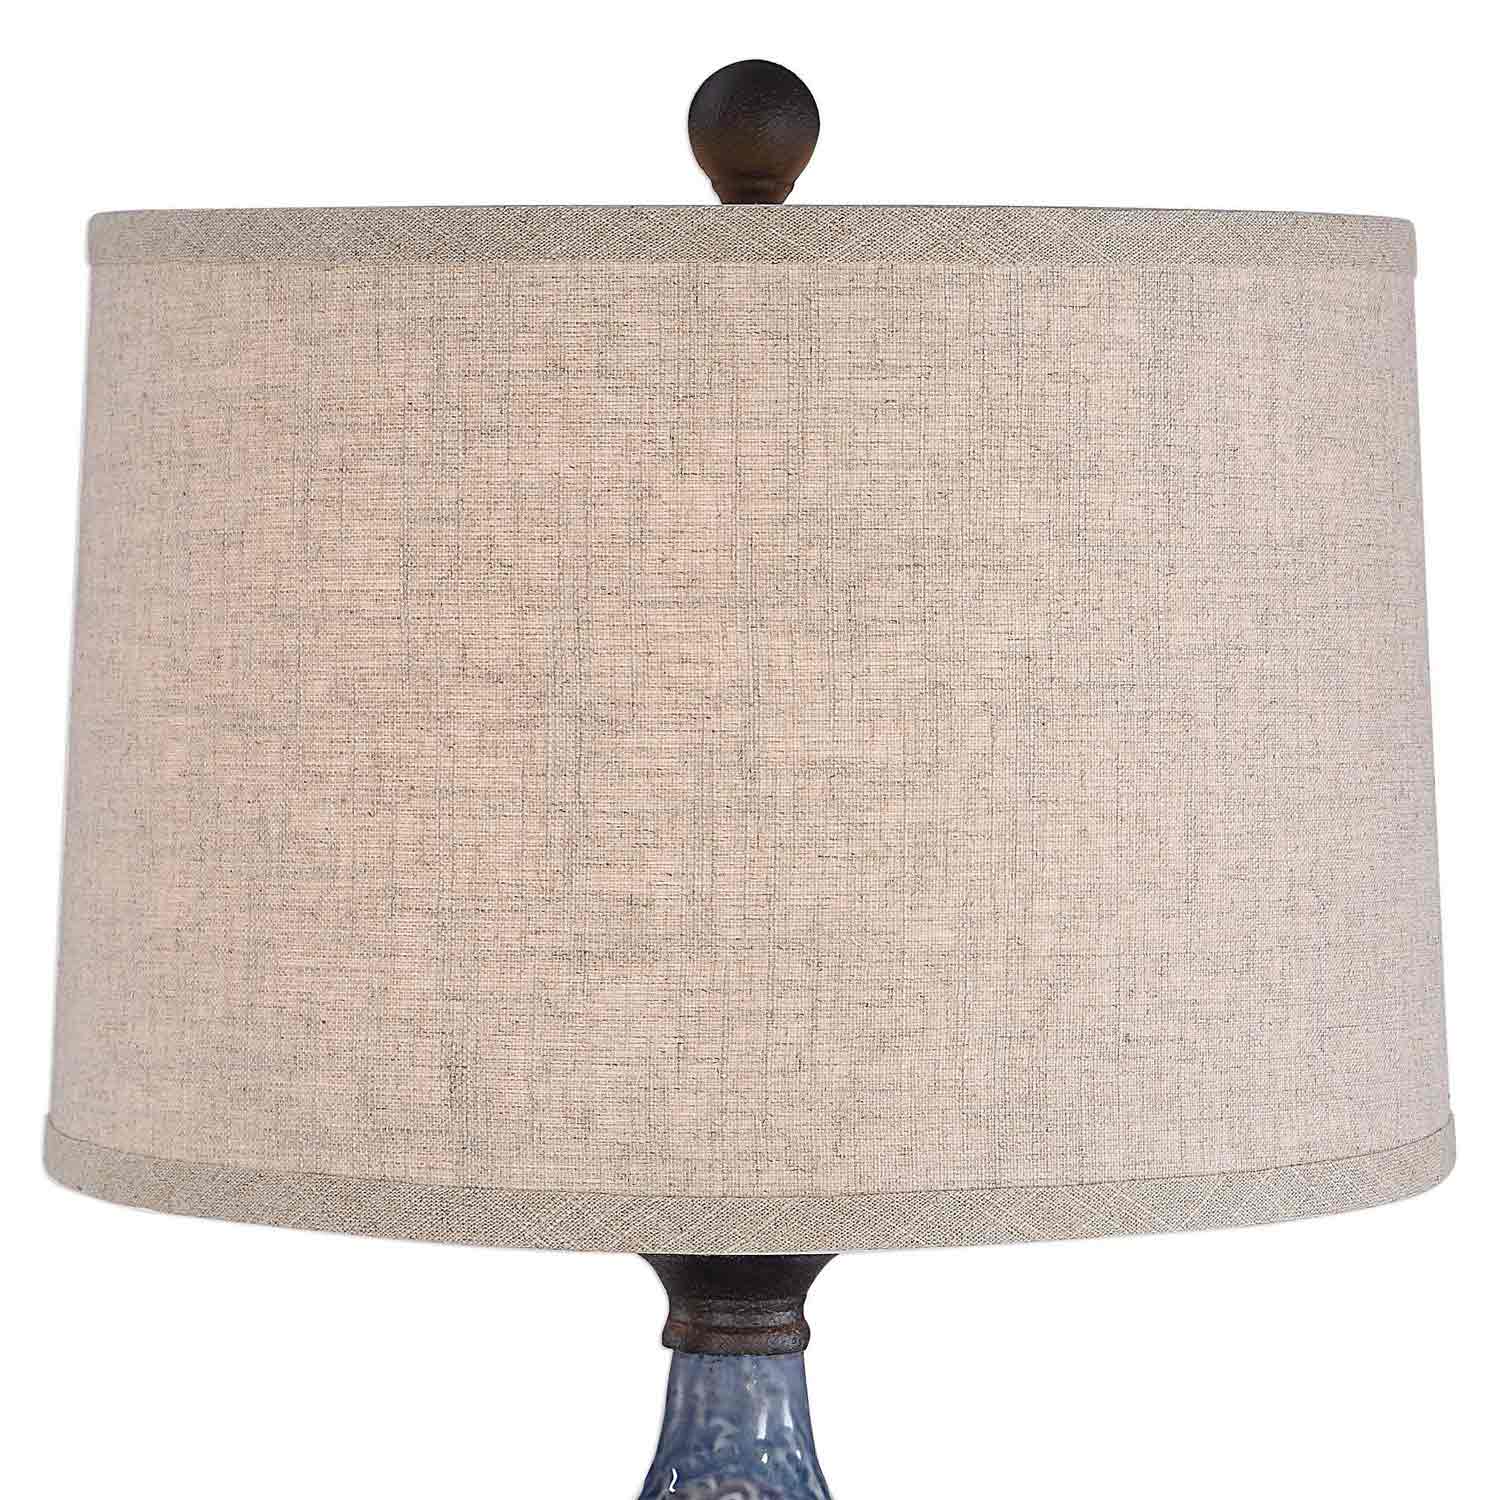 Uttermost W26026-1 Table Lamp - Blue